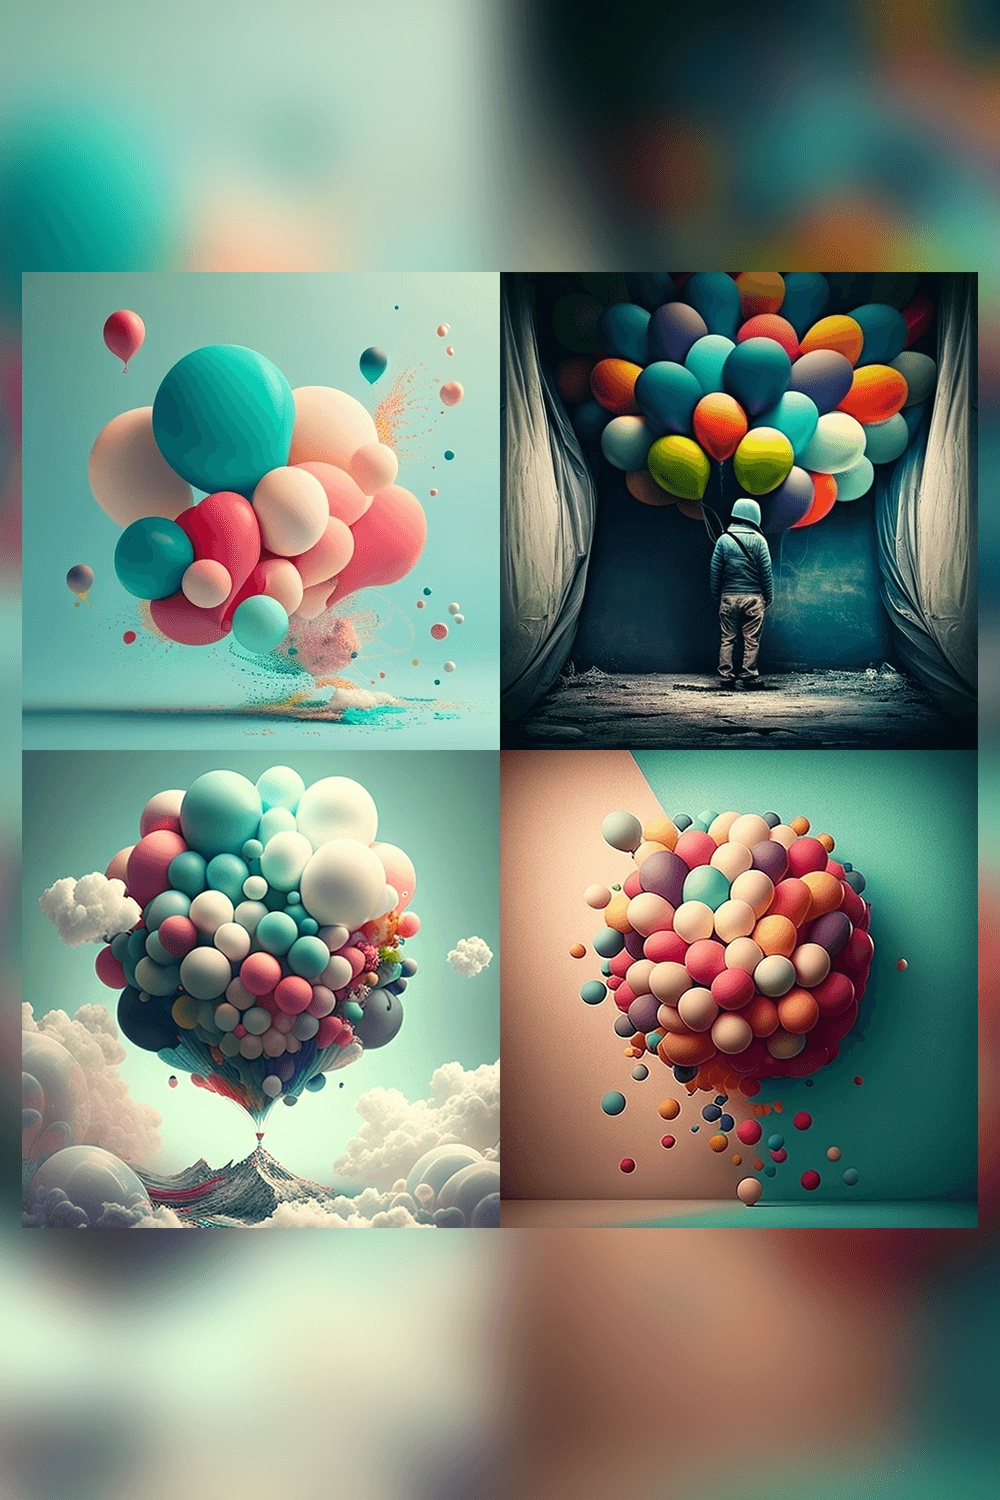 Series of photoshopped images of balloons floating in the air.